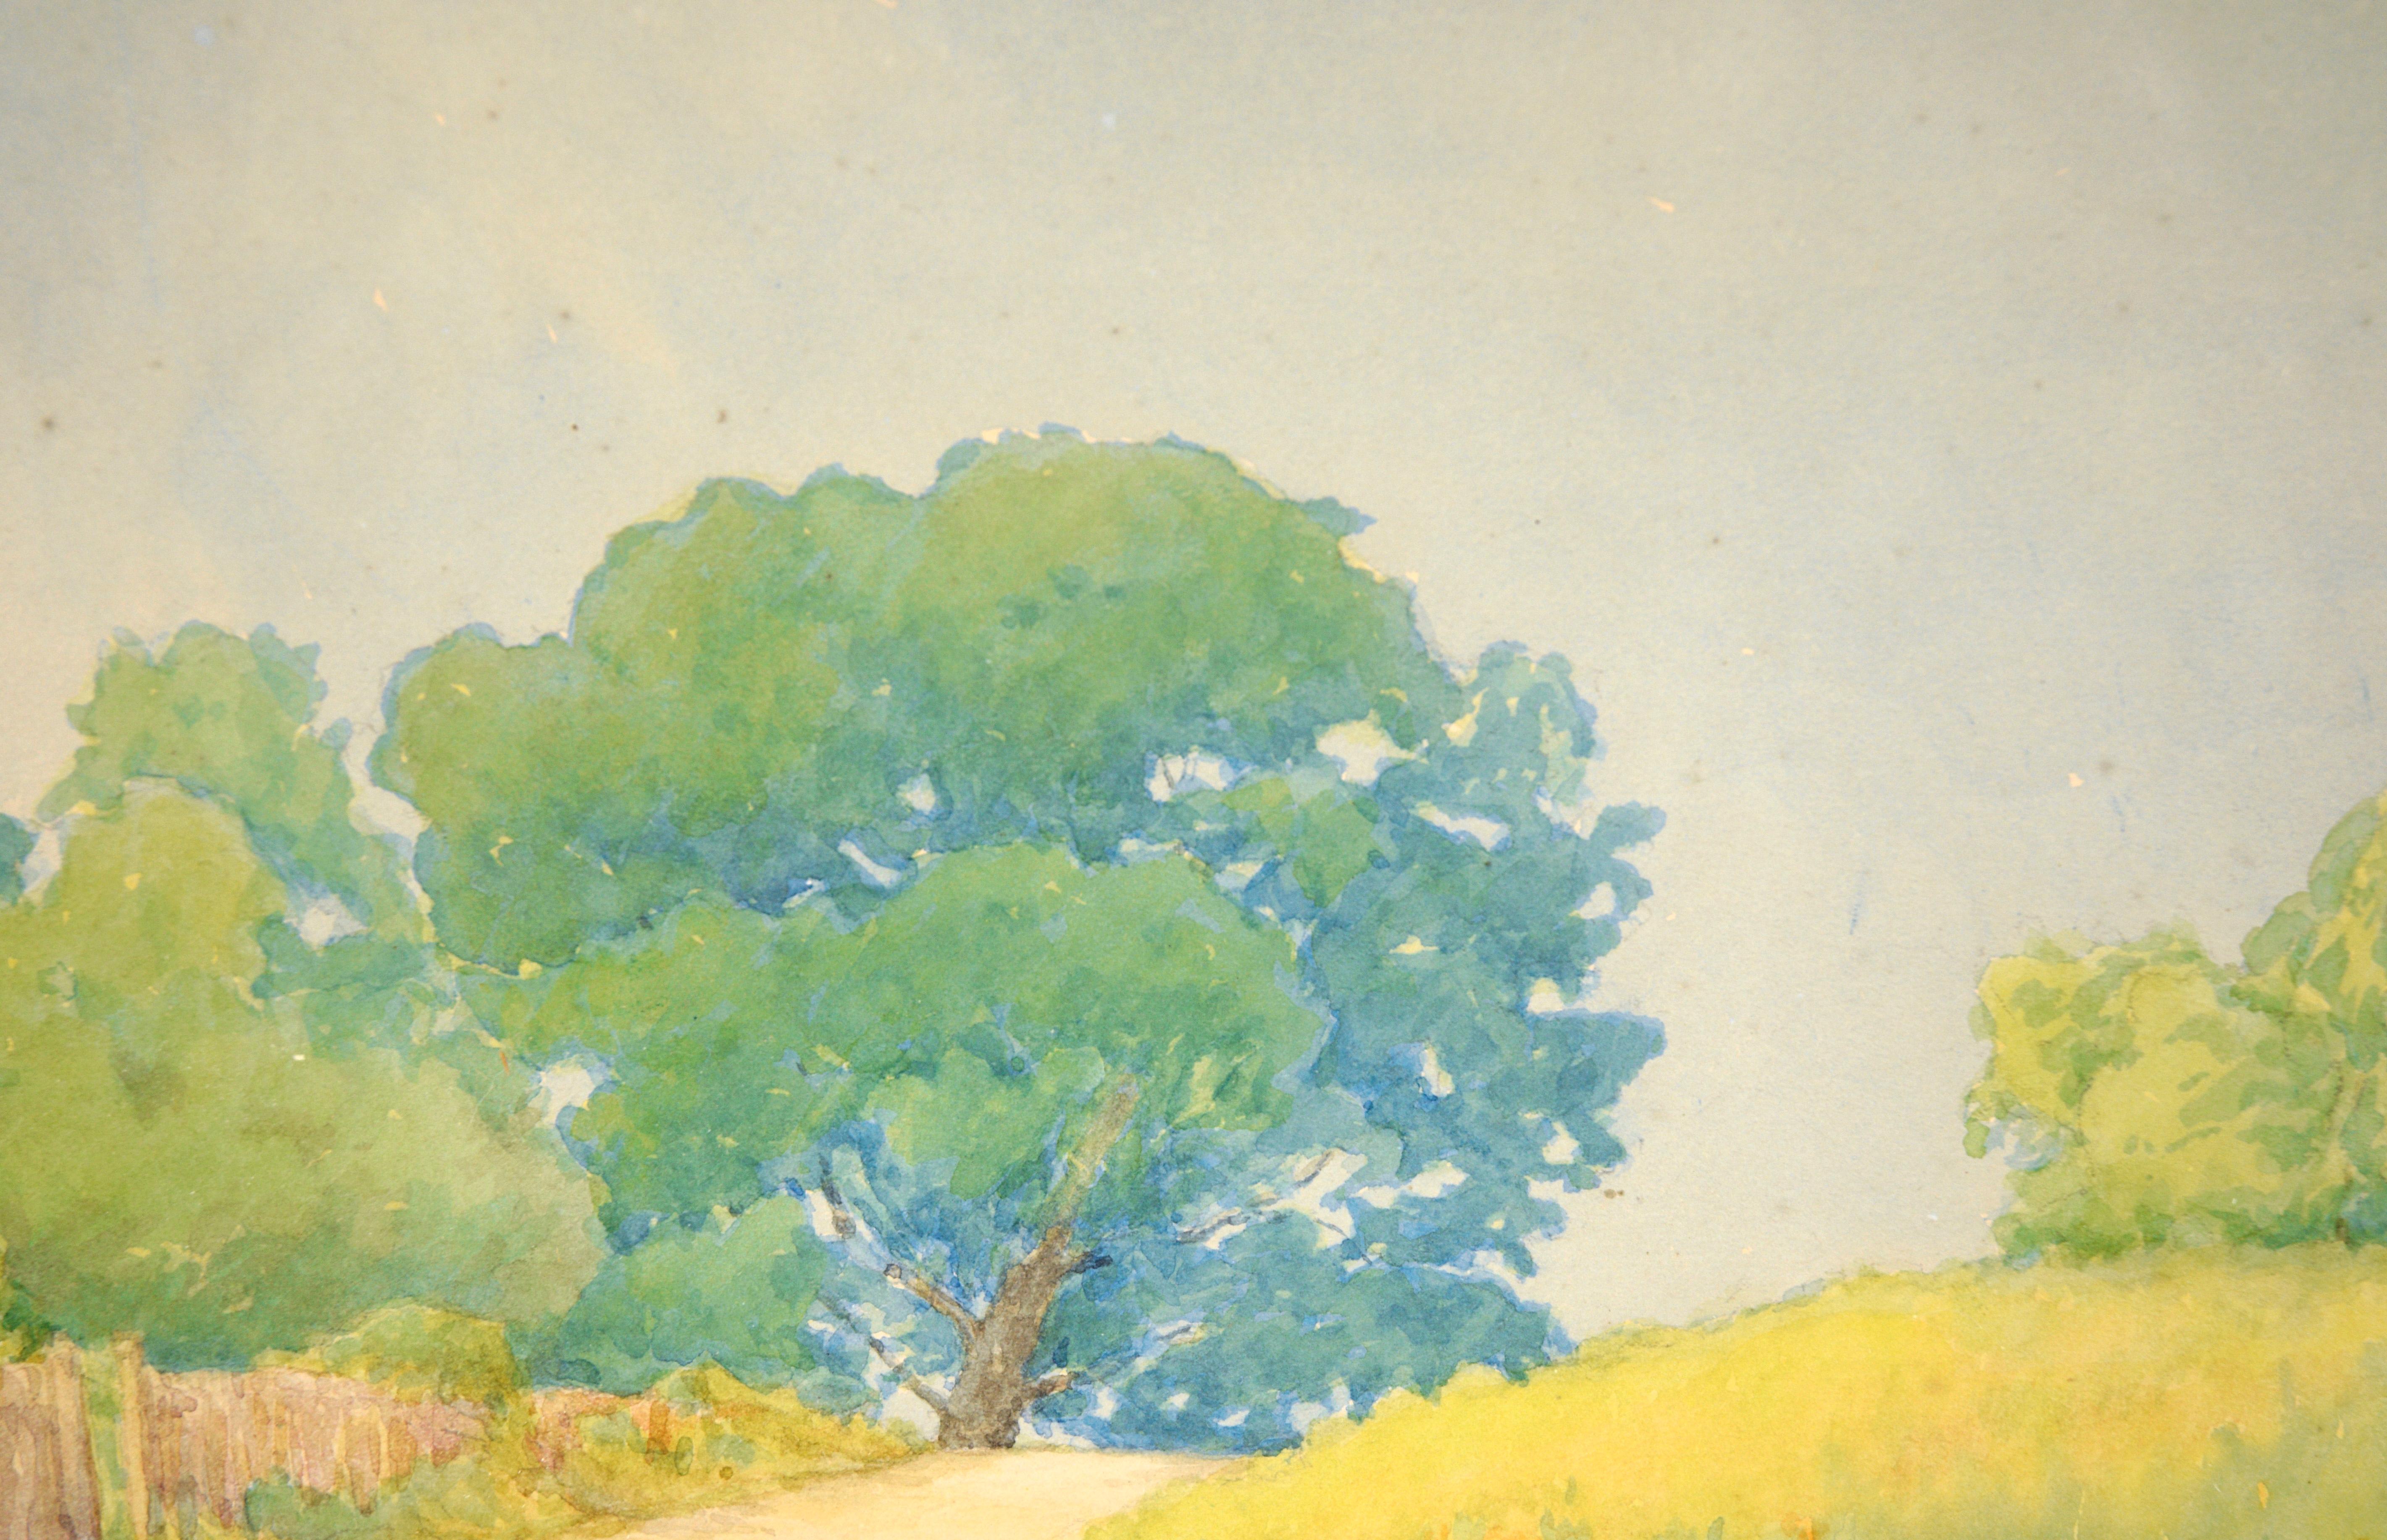 Golden Flowers and Blue Oaks - California Rural Landscape in Watercolor on Paper

Vibrant landscape by listed California artist Marie Williams (American, 1878-1969). Yellow flowers cover a field along a path in a rural area of California. The path